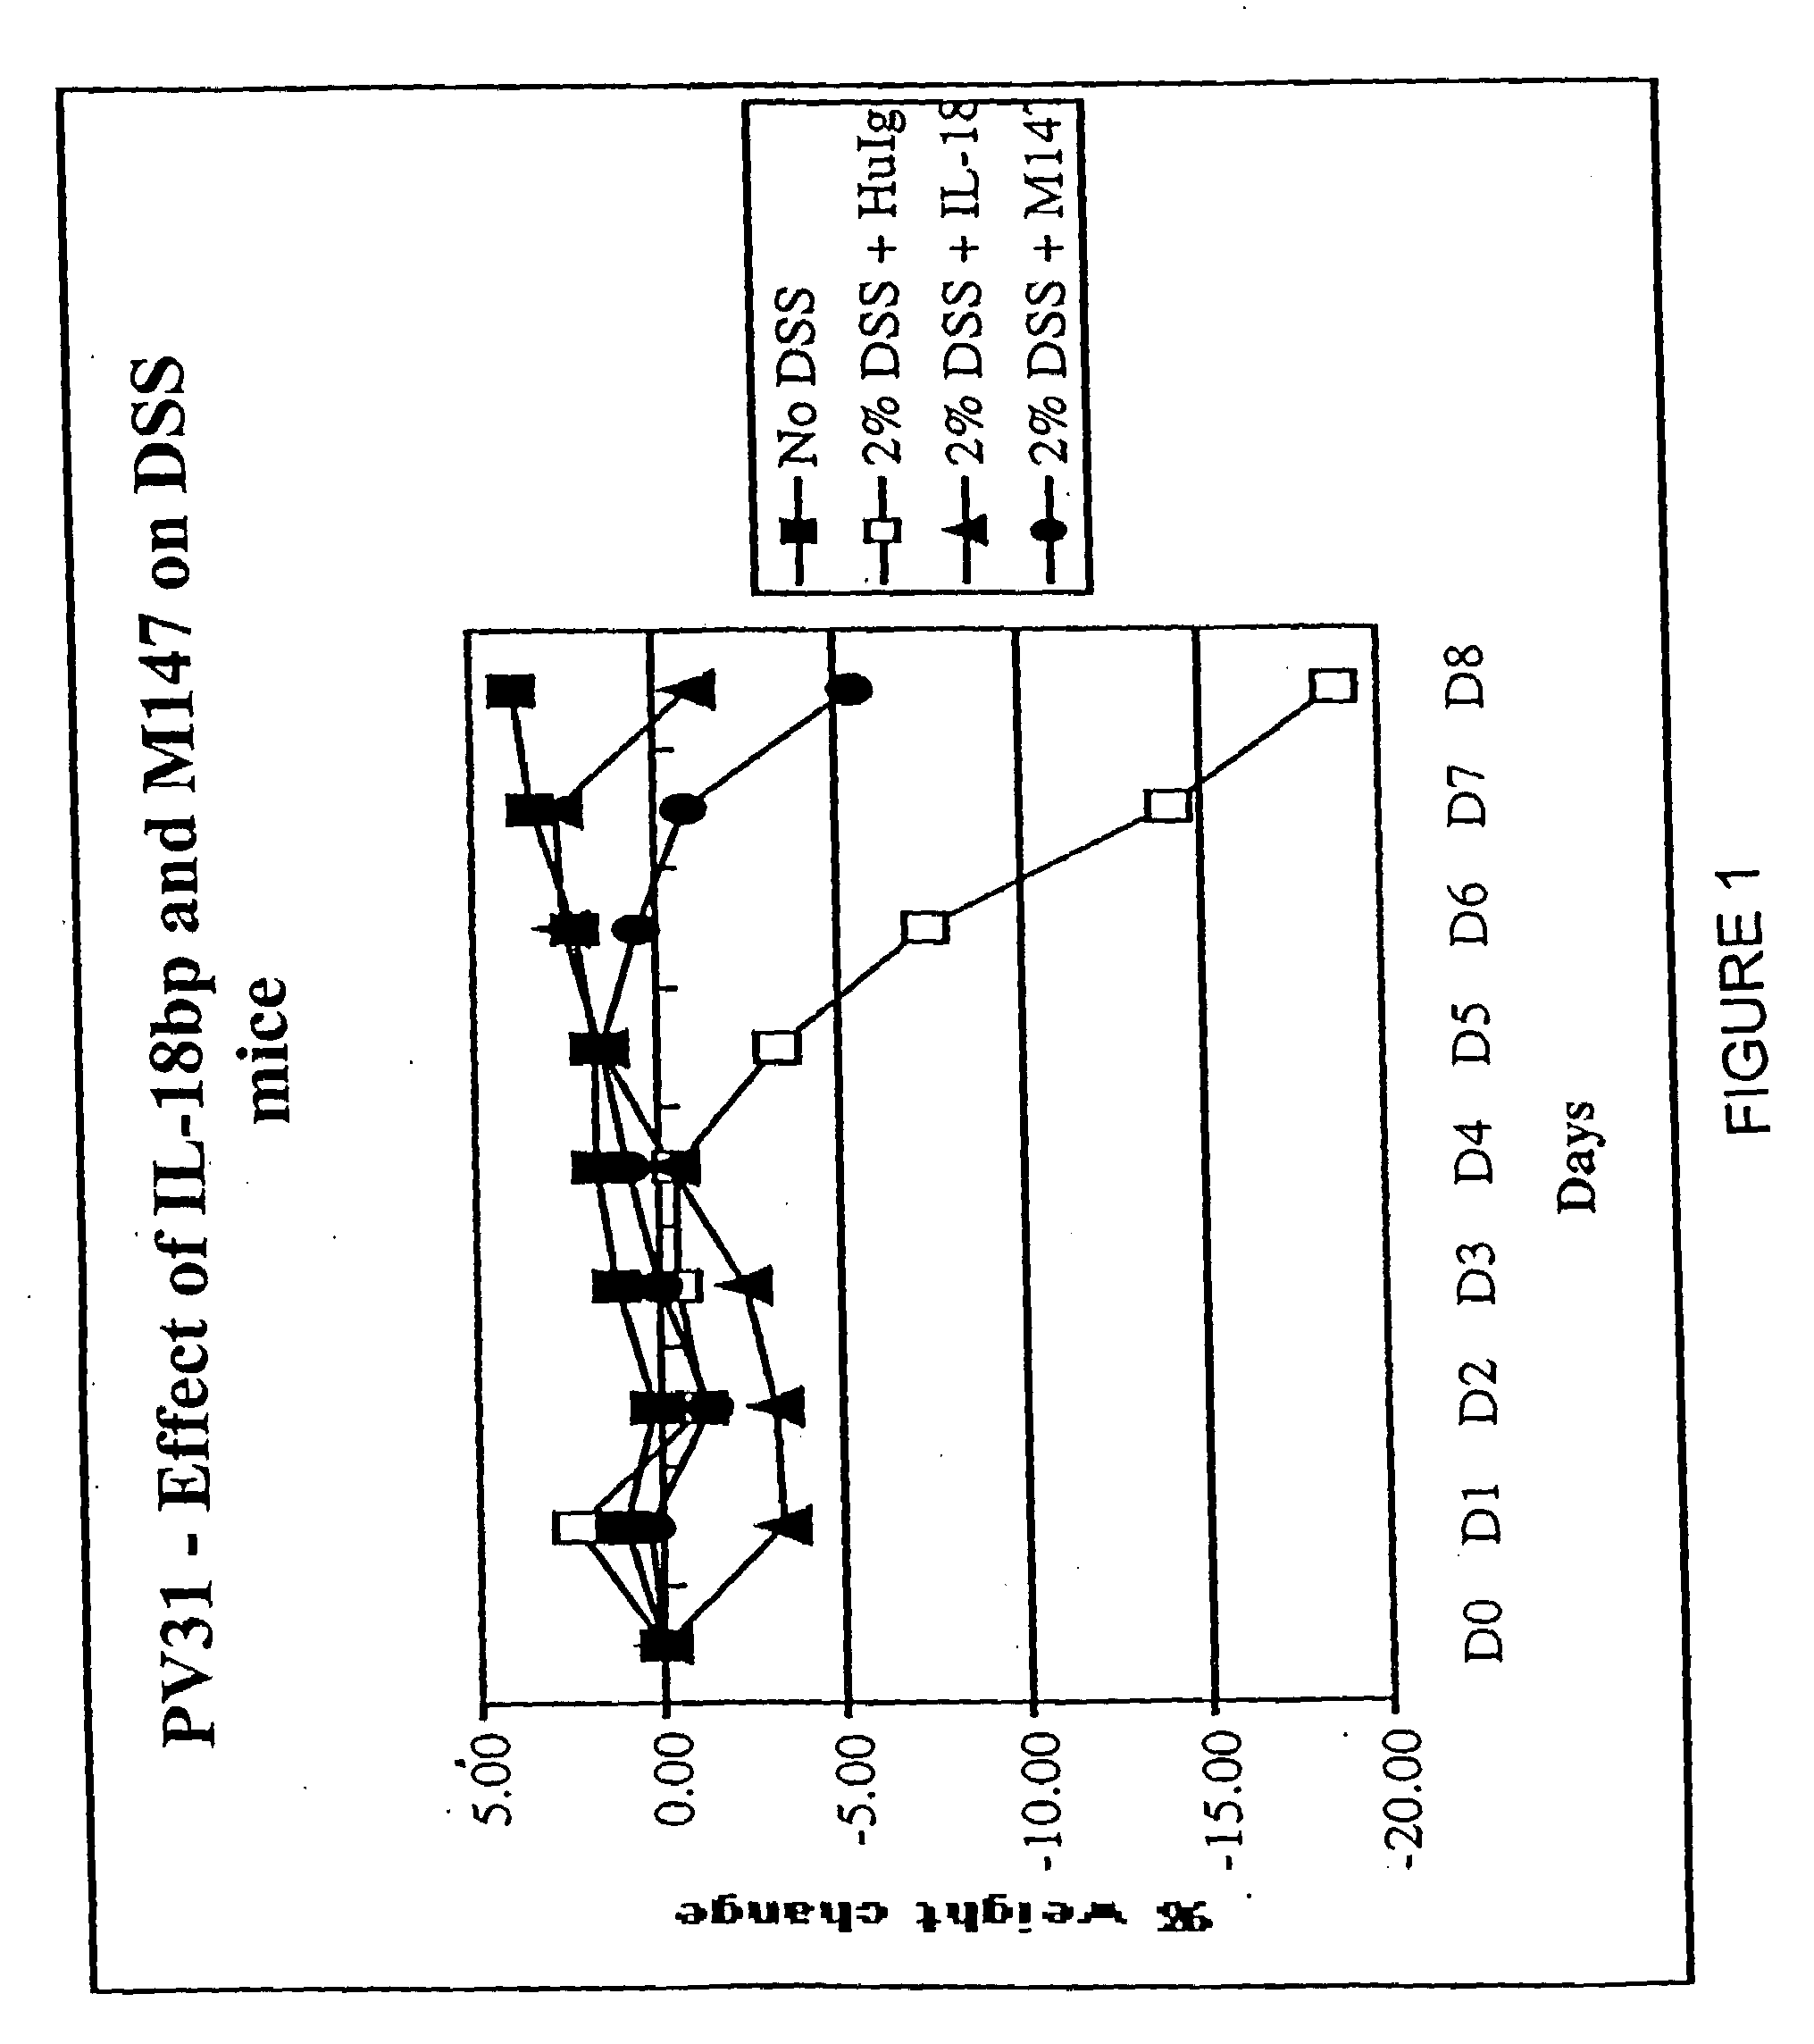 Methods for treating IL-18 mediated disorders